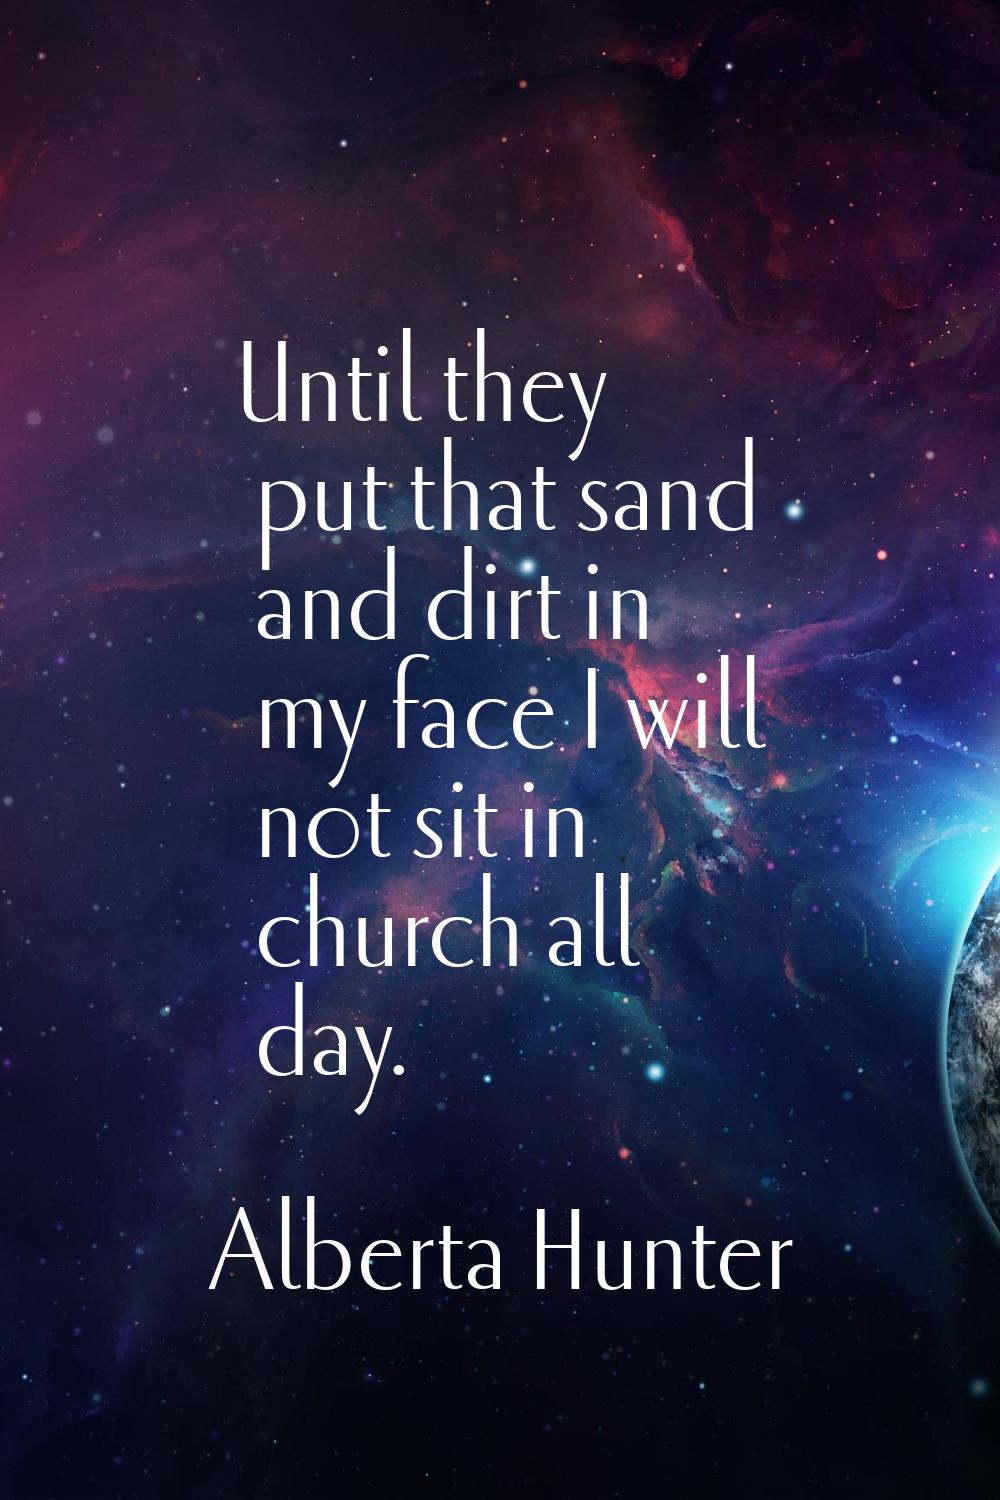 Until they put that sand and dirt in my face I will not sit in church all day.